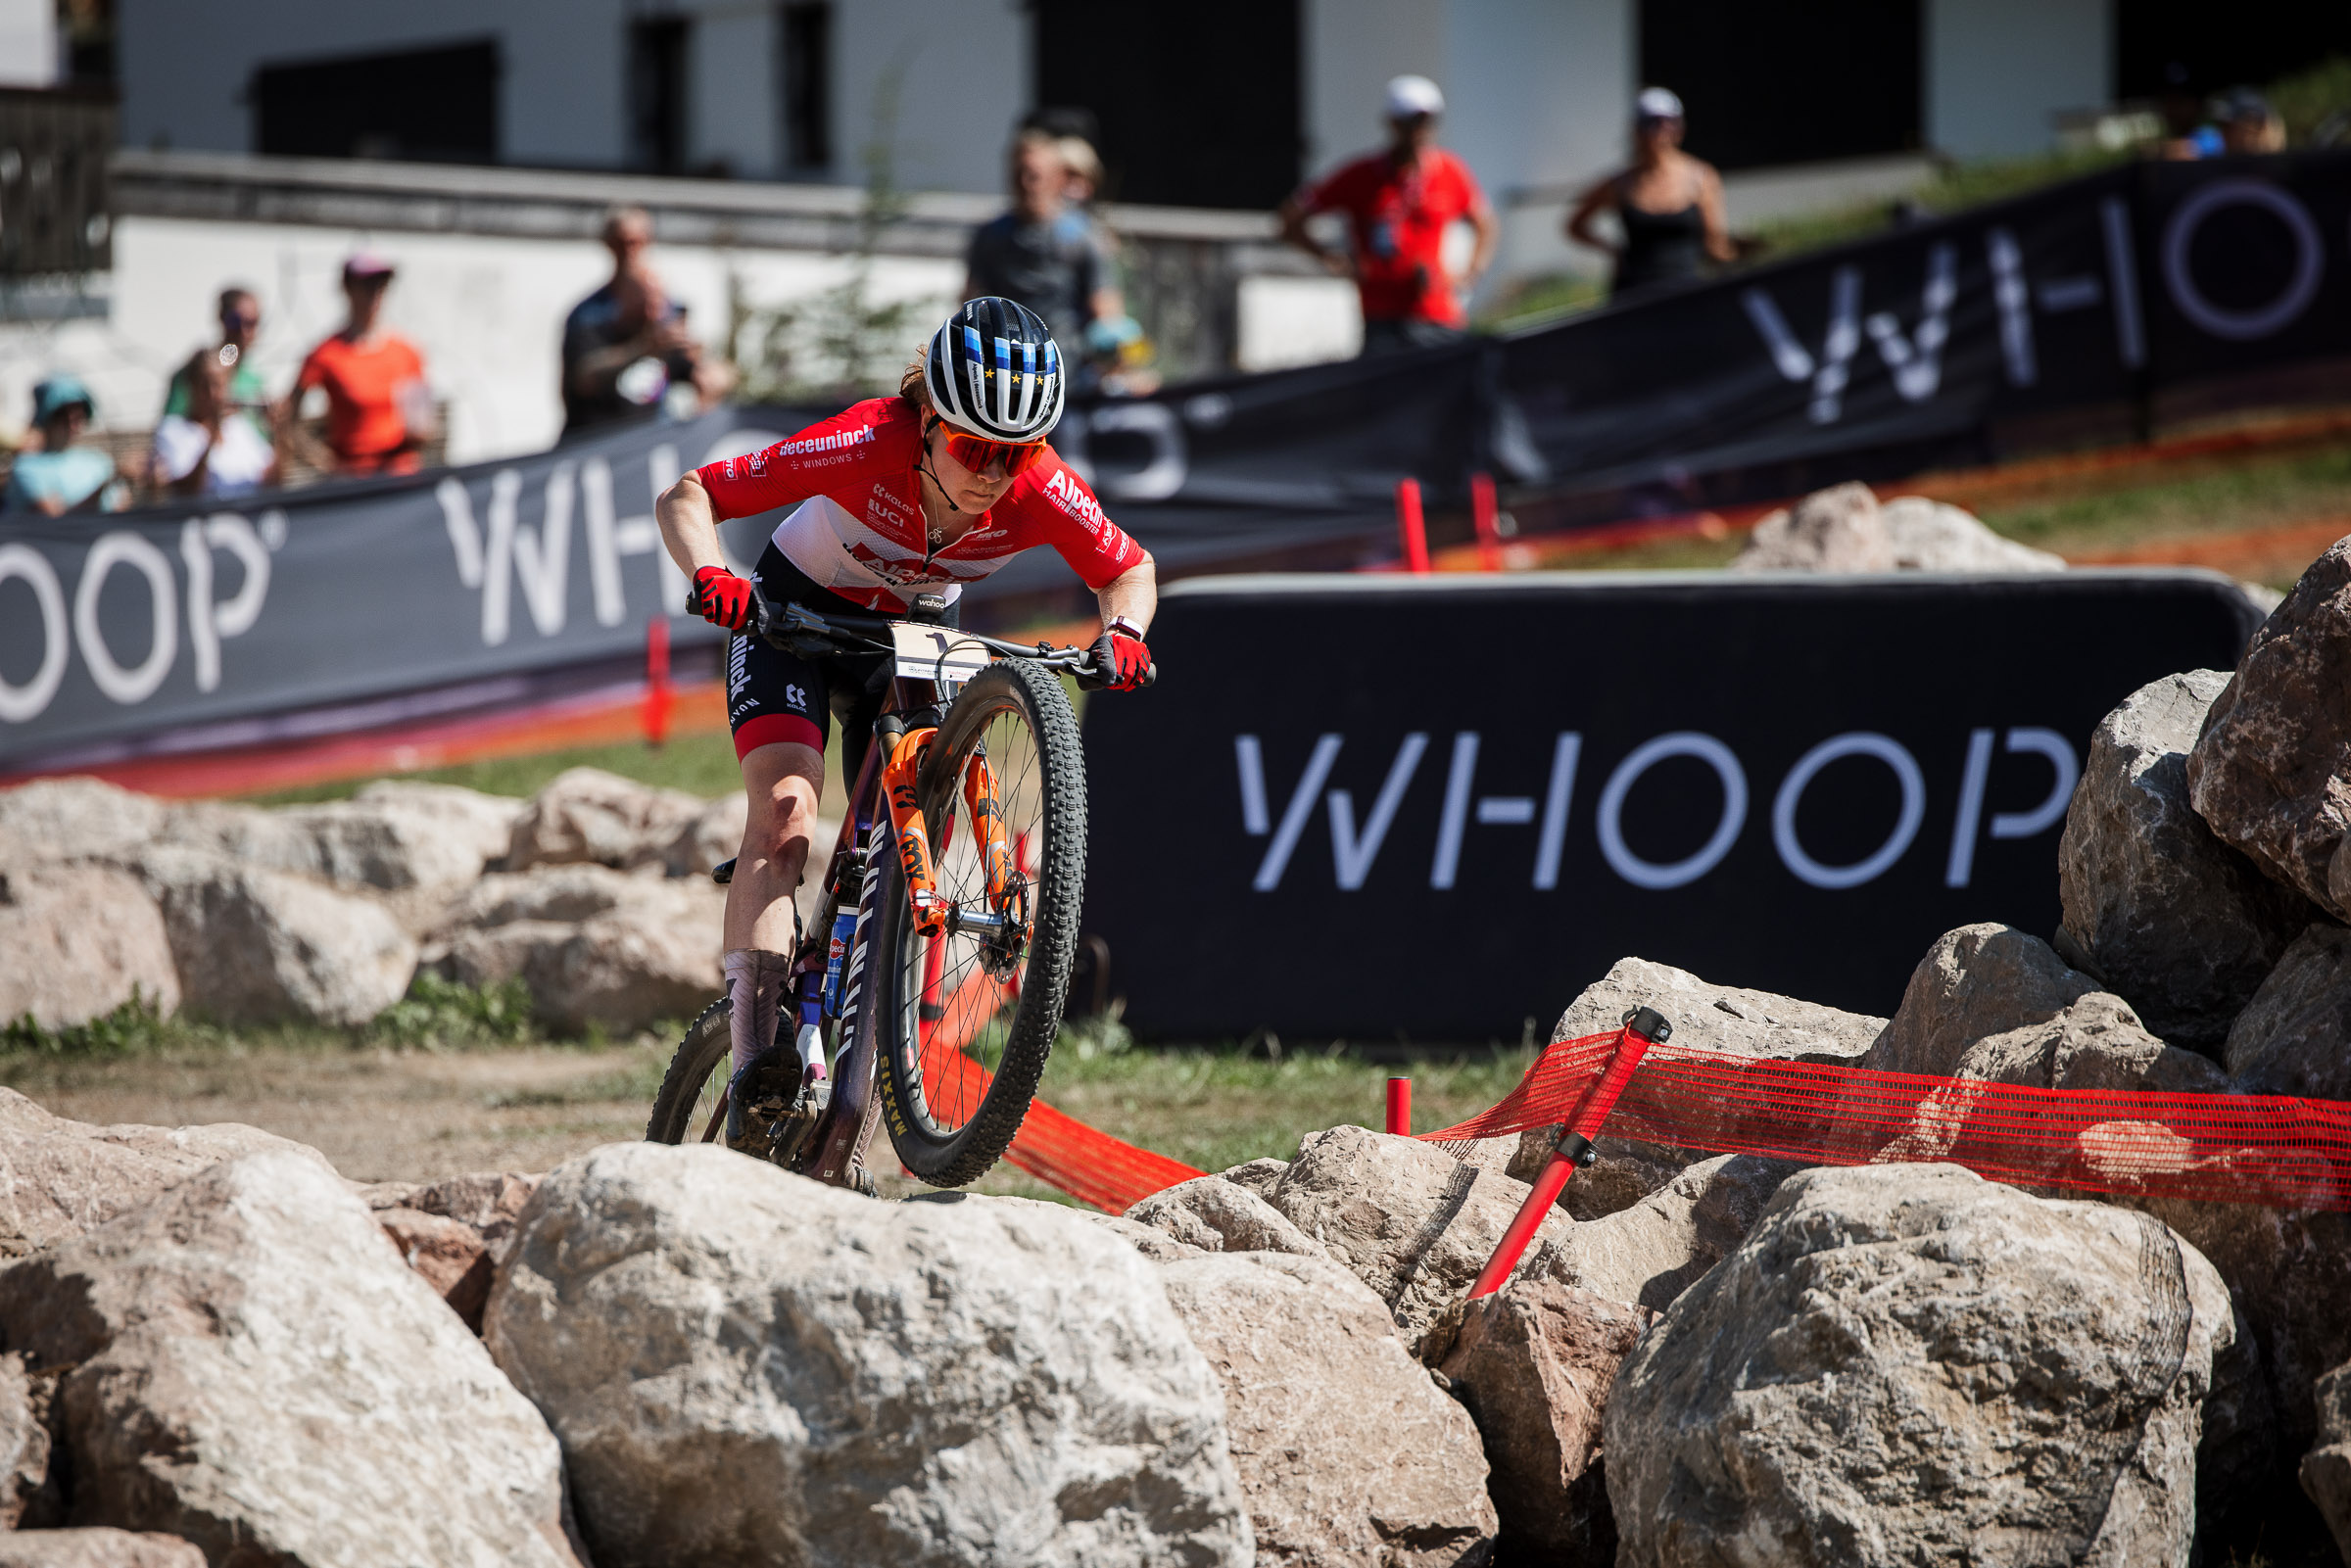 WHOOP BECOMES TITLE SPONSOR  OF UCI MOUNTAIN BIKE WORLD SERIES